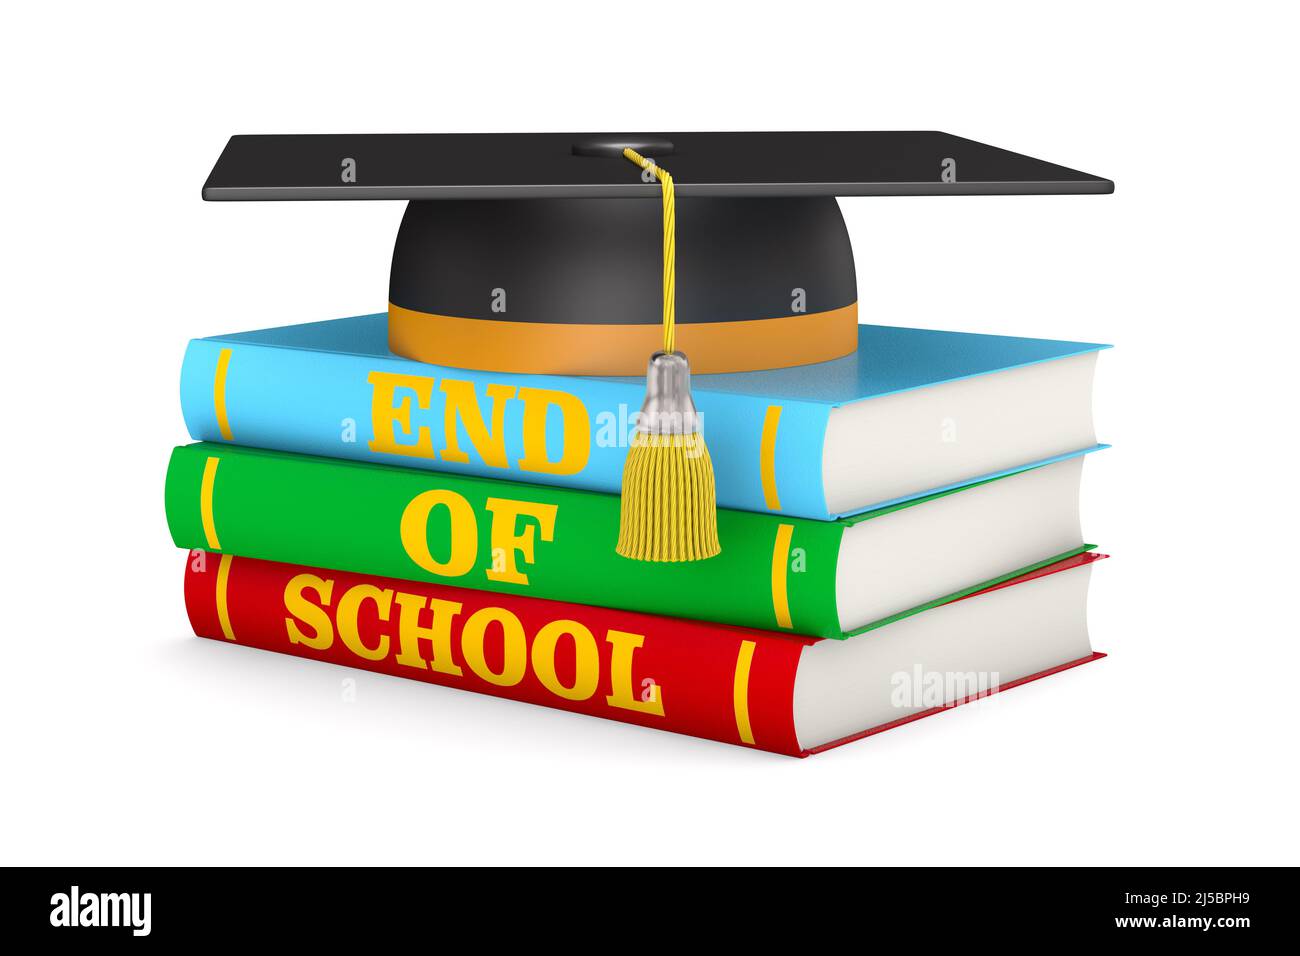 End of school. Graduation cap and pile books on white background. Isolated 3D illustration Stock Photo